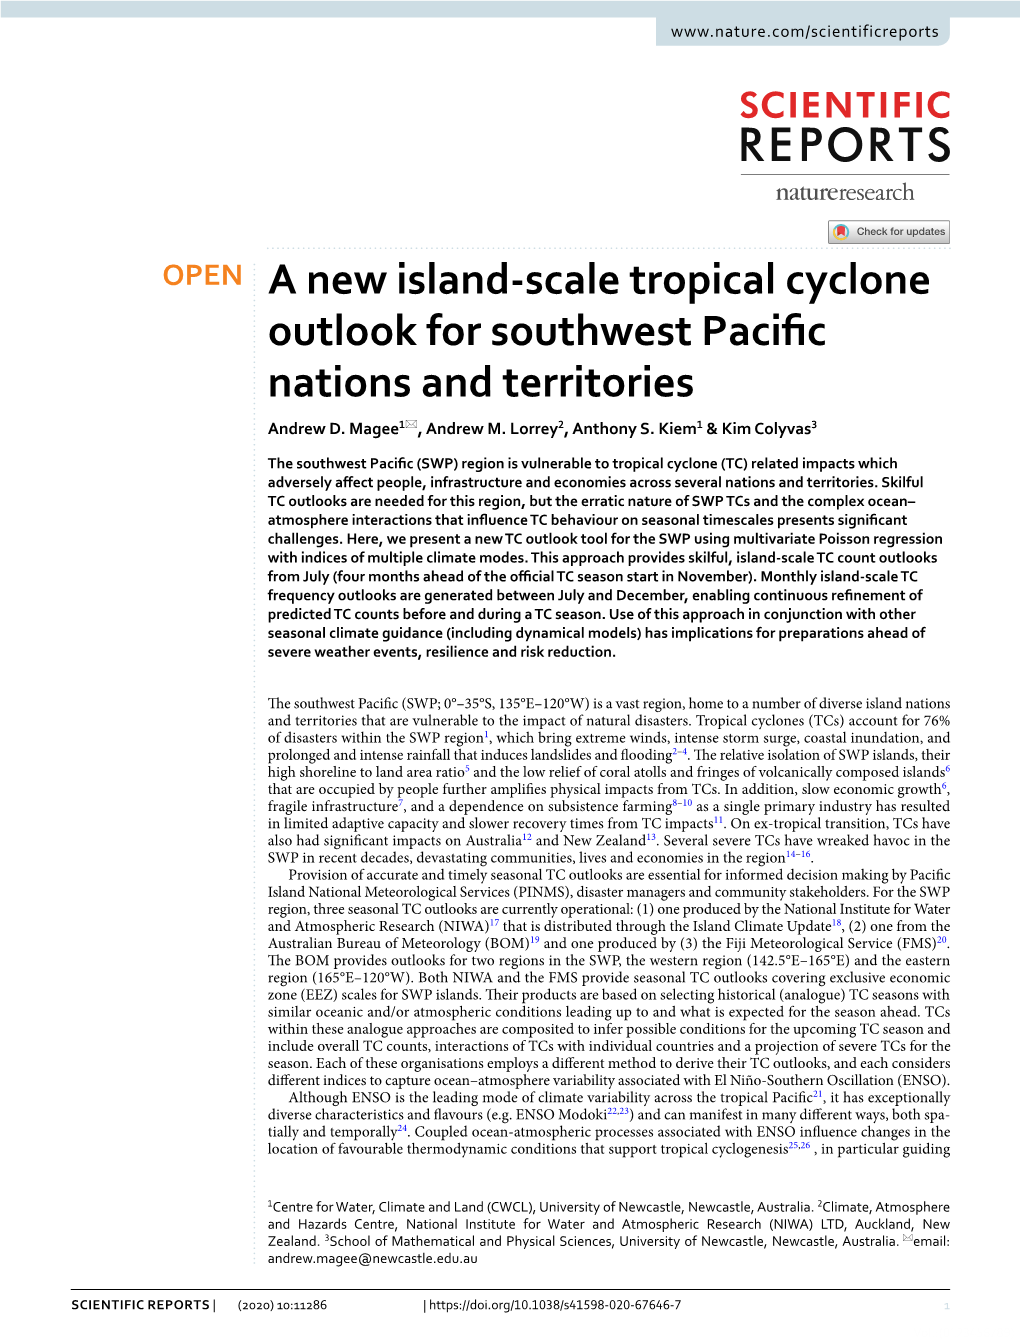 A New Island-Scale Tropical Cyclone Outlook for Southwest Pacific